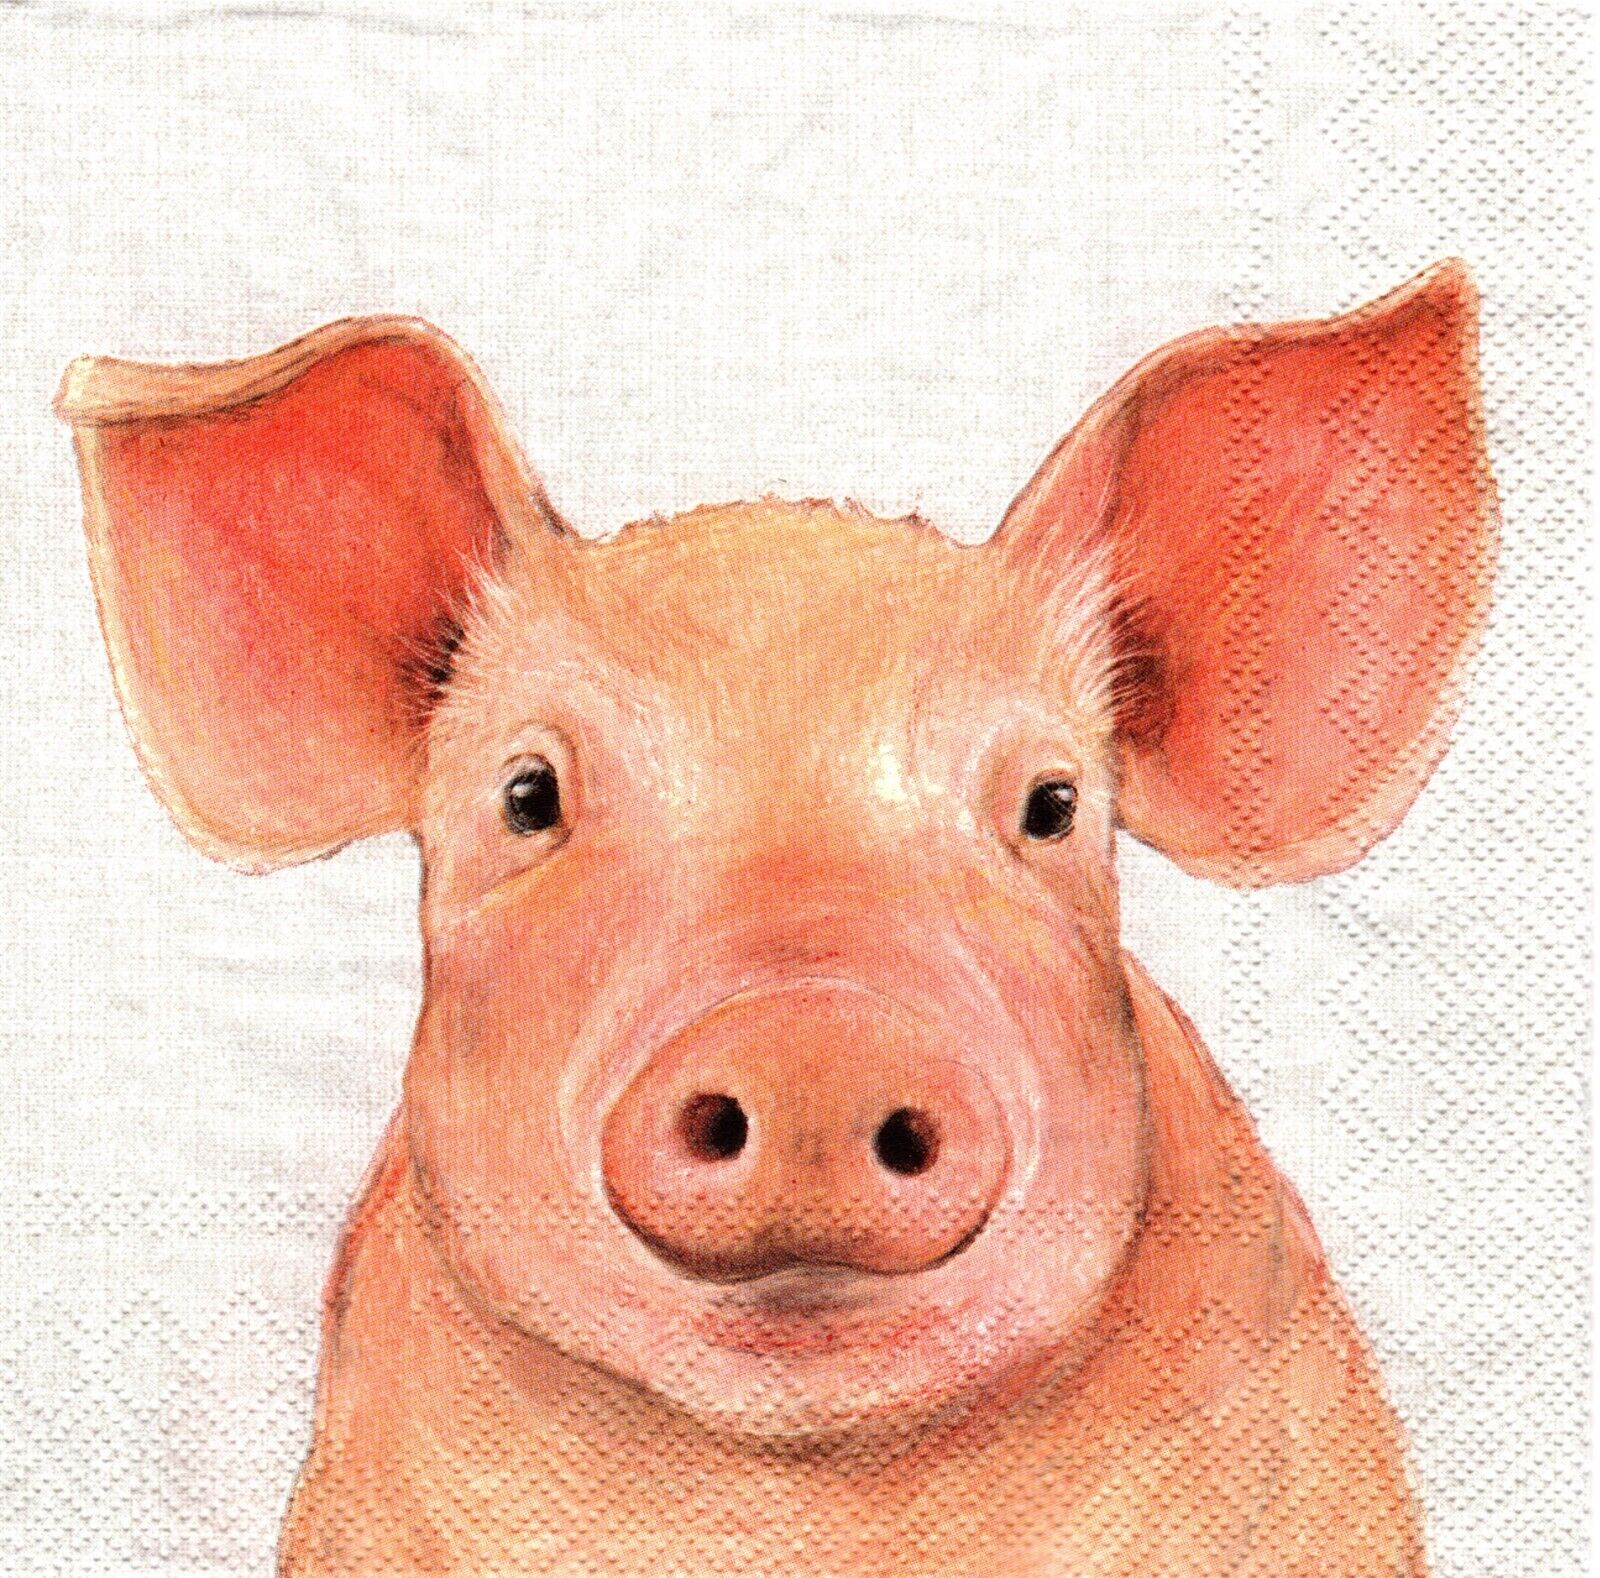 (2) Two Paper Lunch Napkins for Decoupage/Mixed Media - Single Pig farm animal